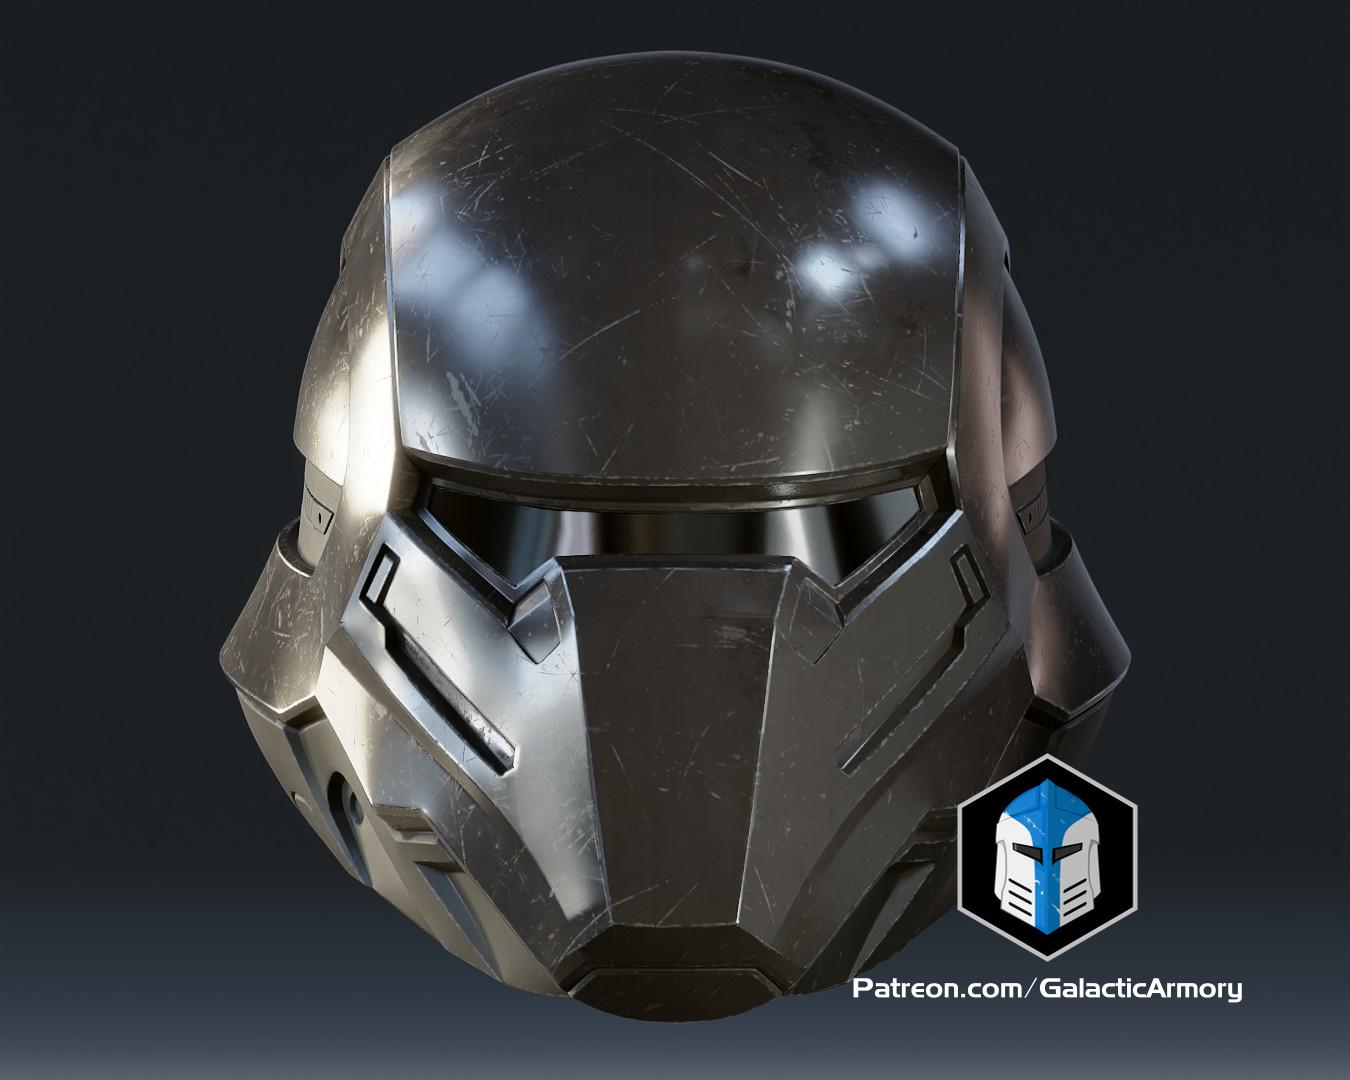 [New Files!] The Helldivers 2 Exterminator helmet has been added to the March Specialist rewards!